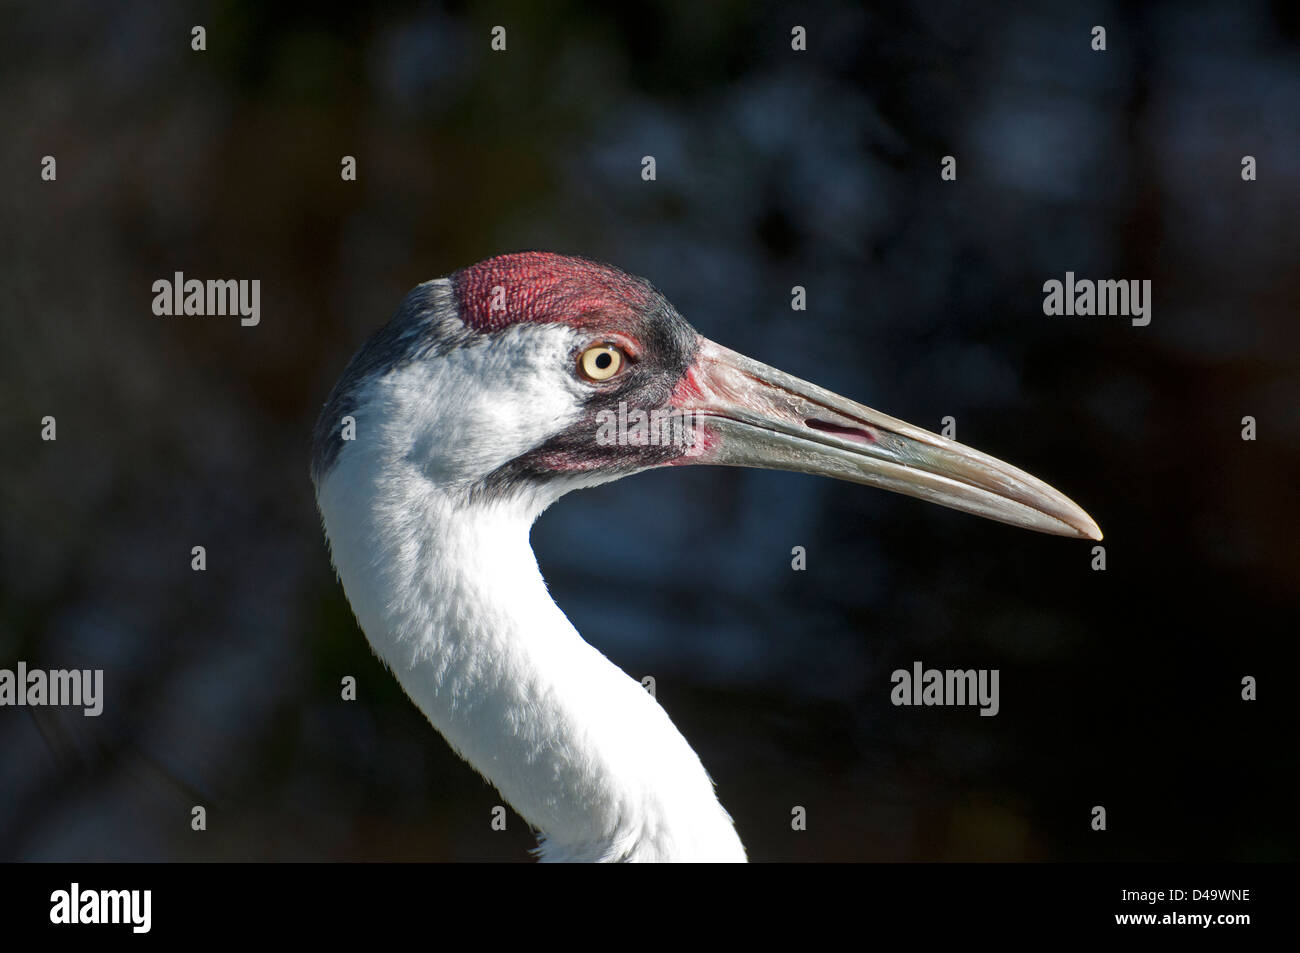 Close-up of a Whooping Crane. Stock Photo